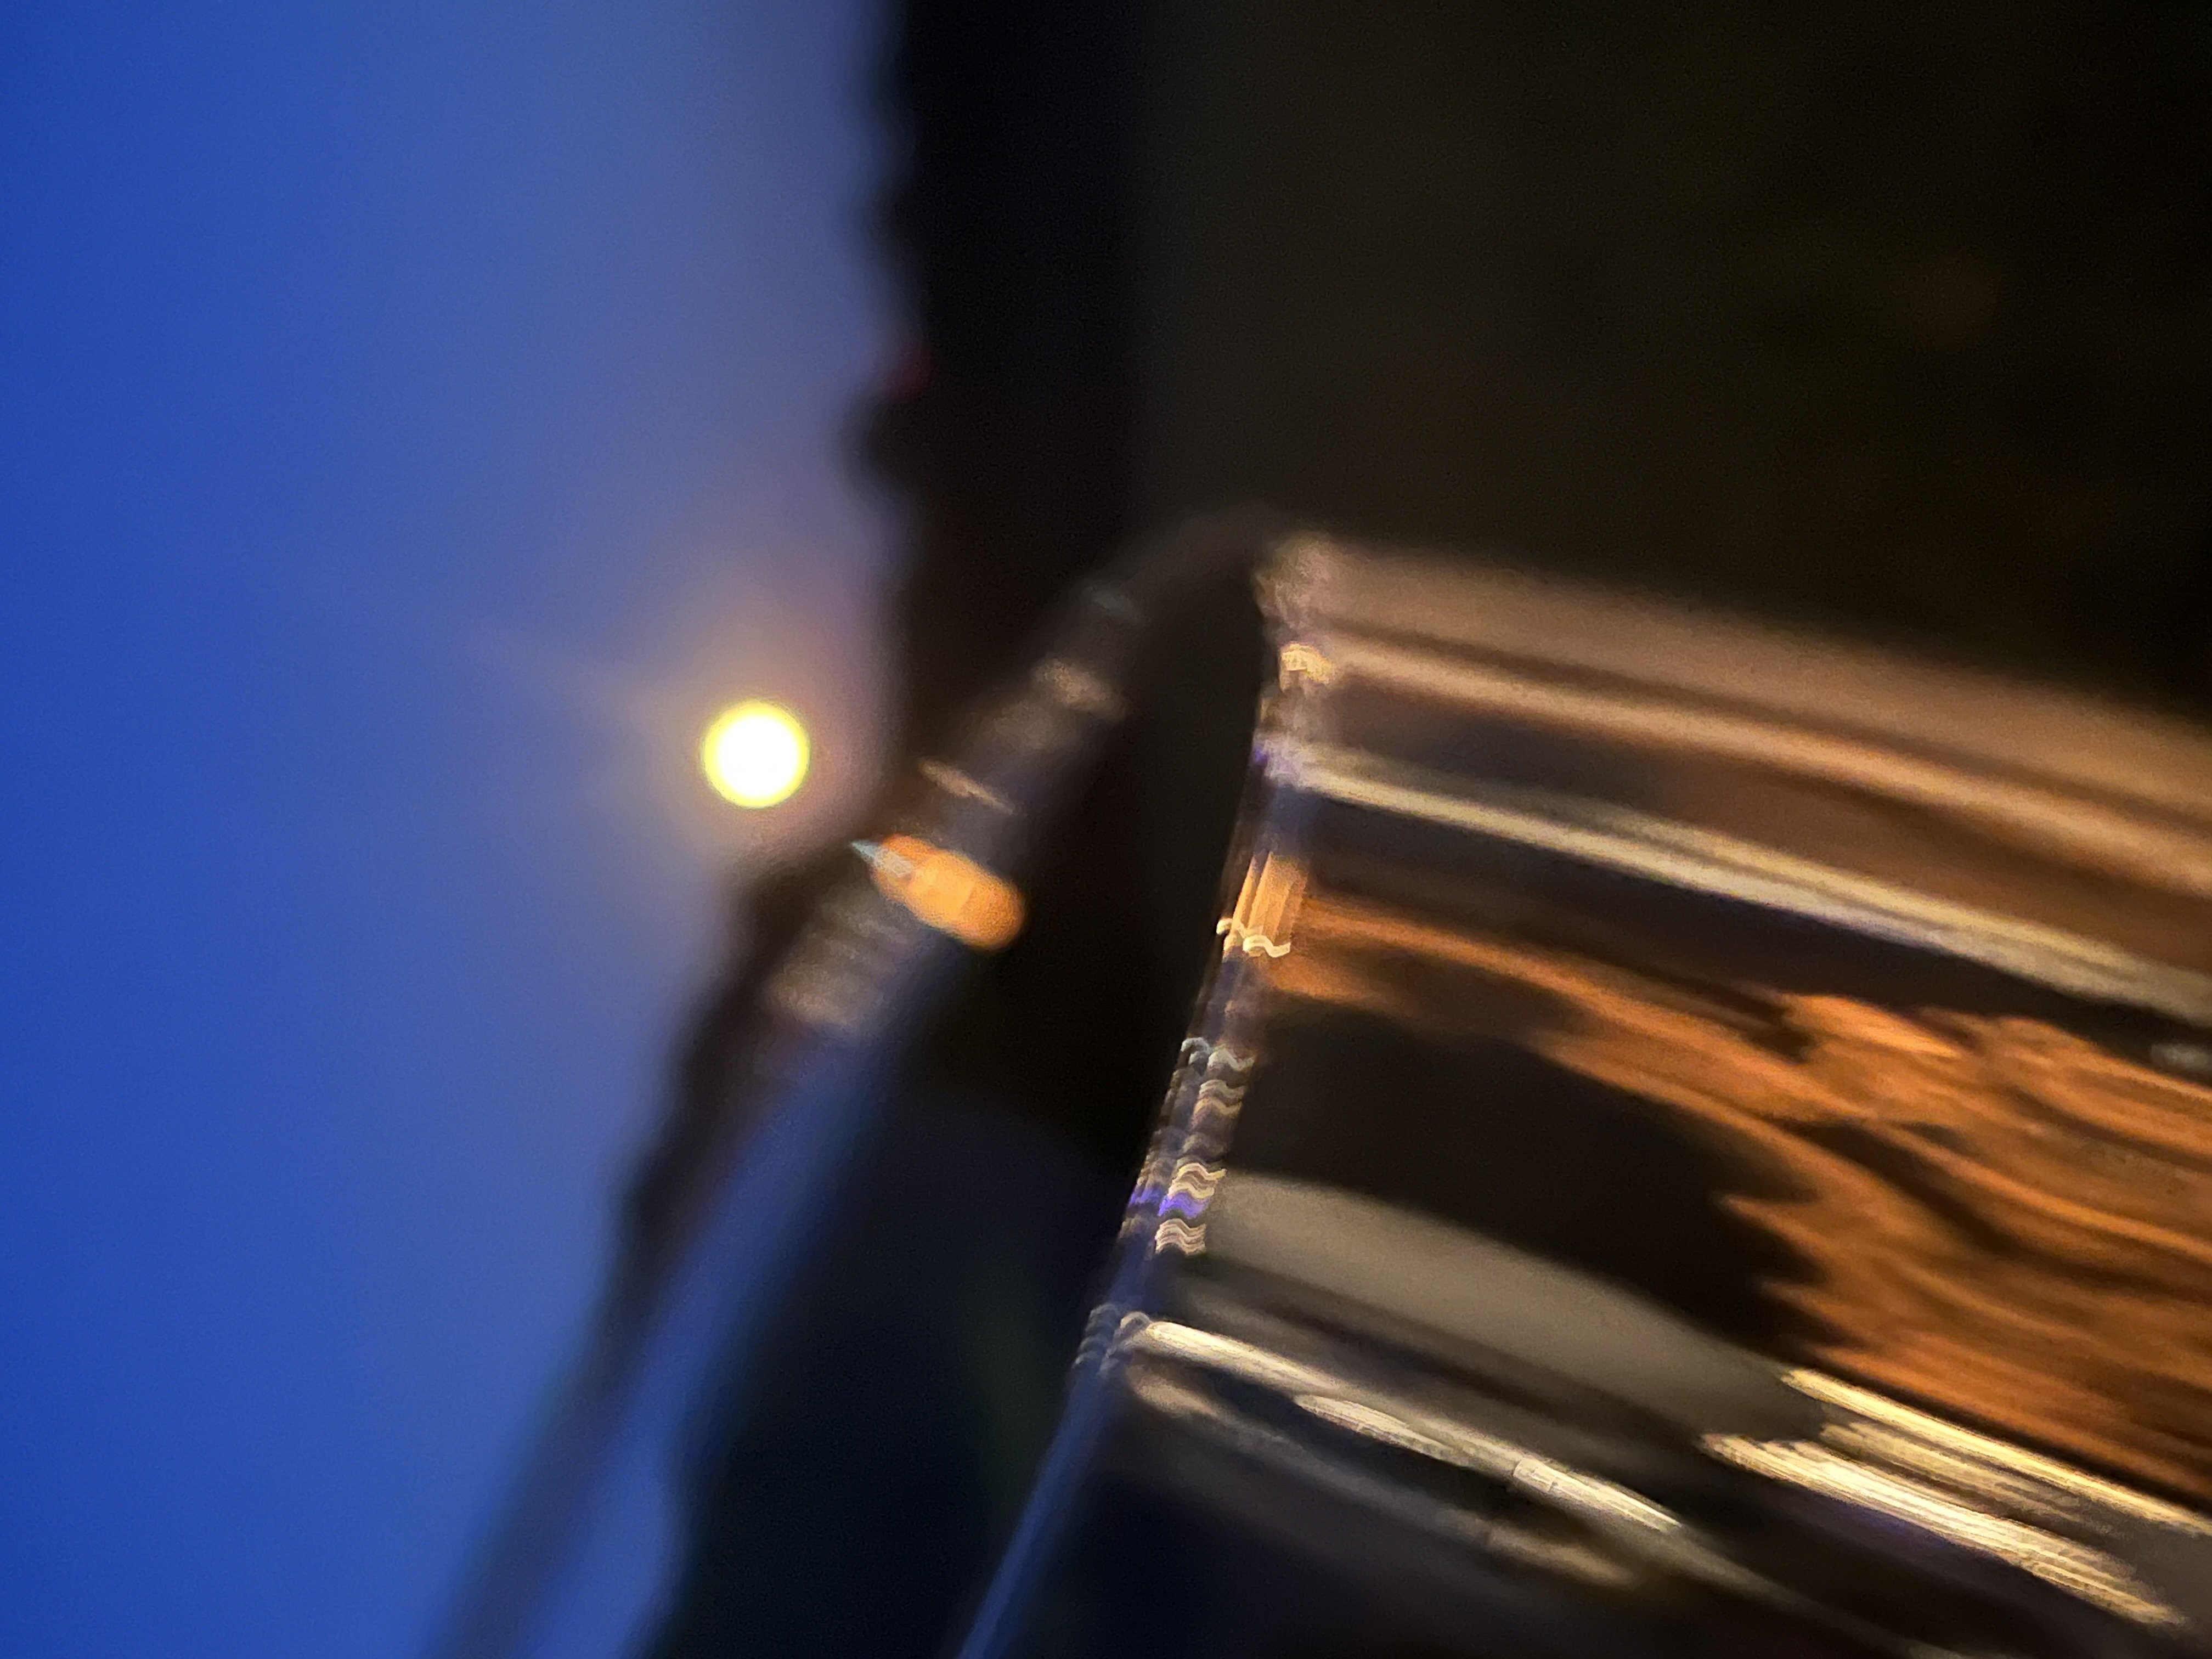 Wine glass in the moonlight